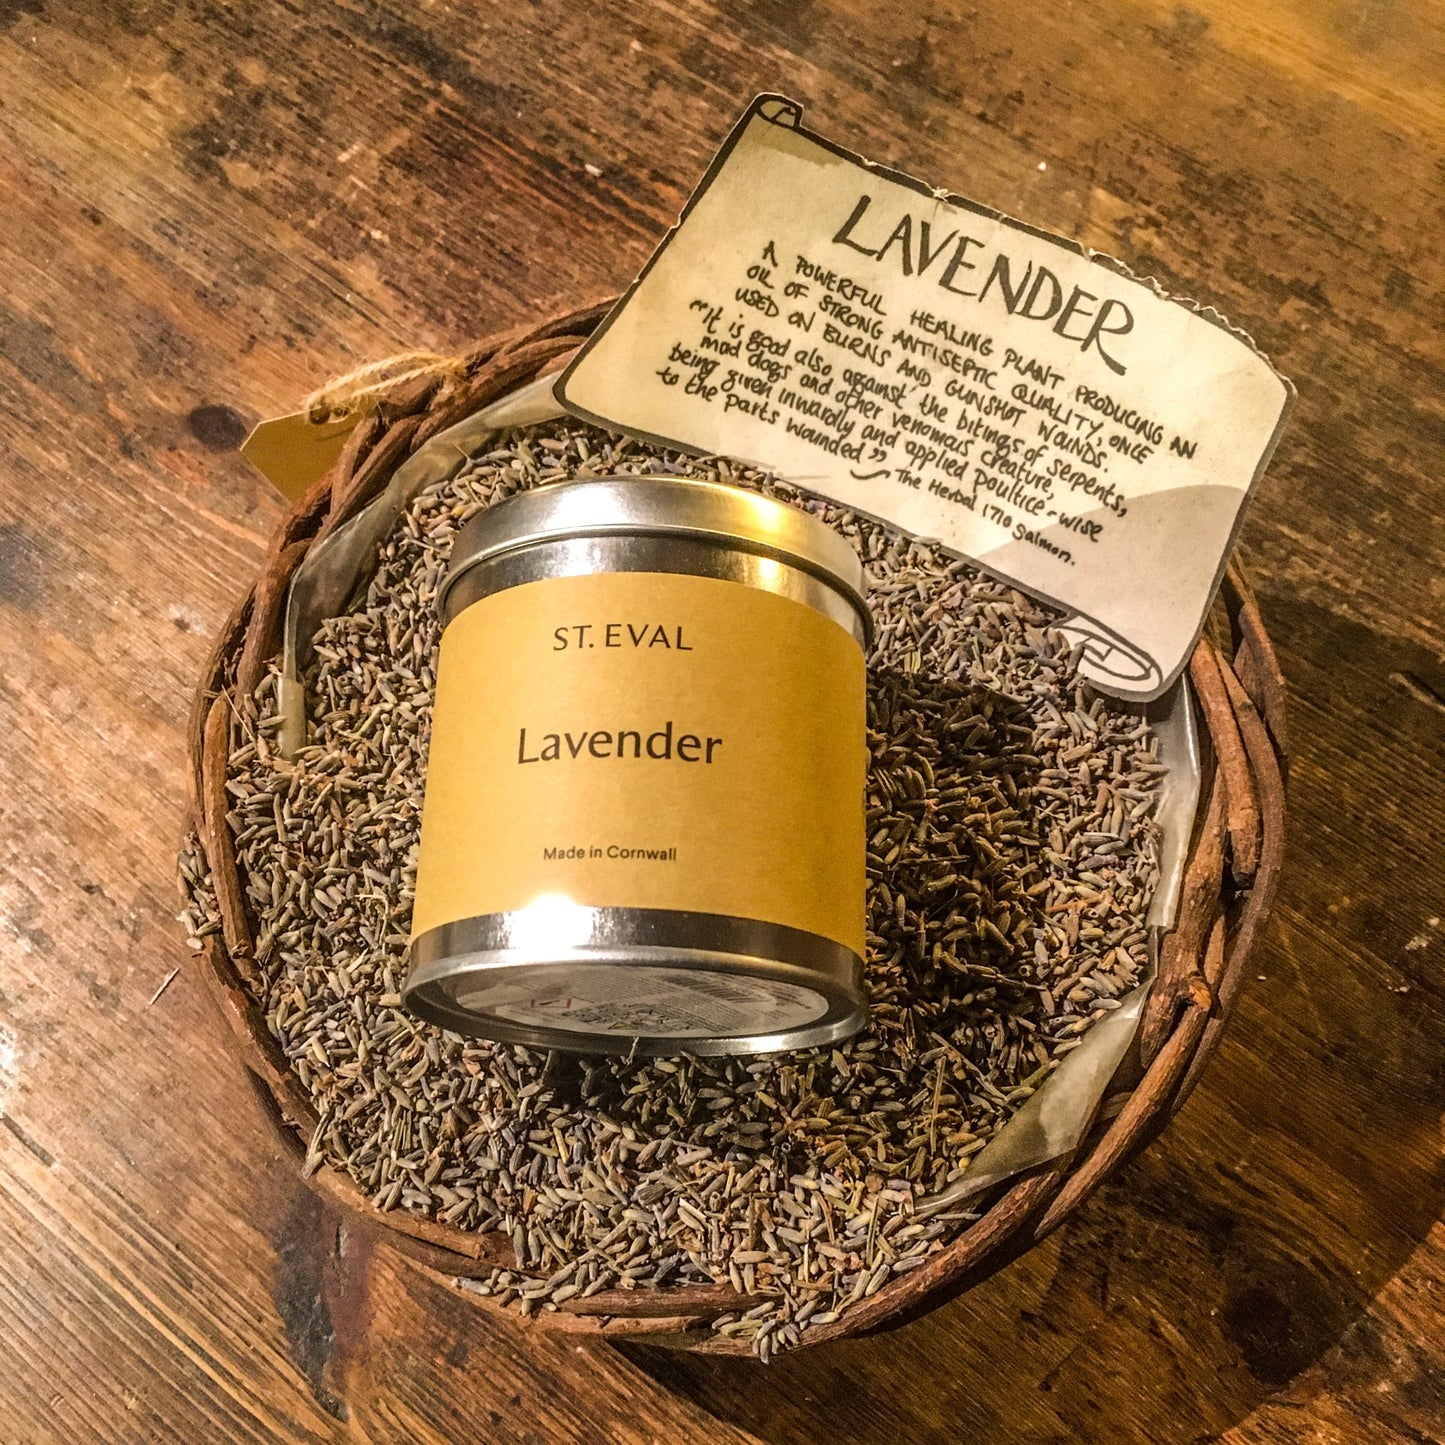 A lavender candle tin in a basket of dried lavender